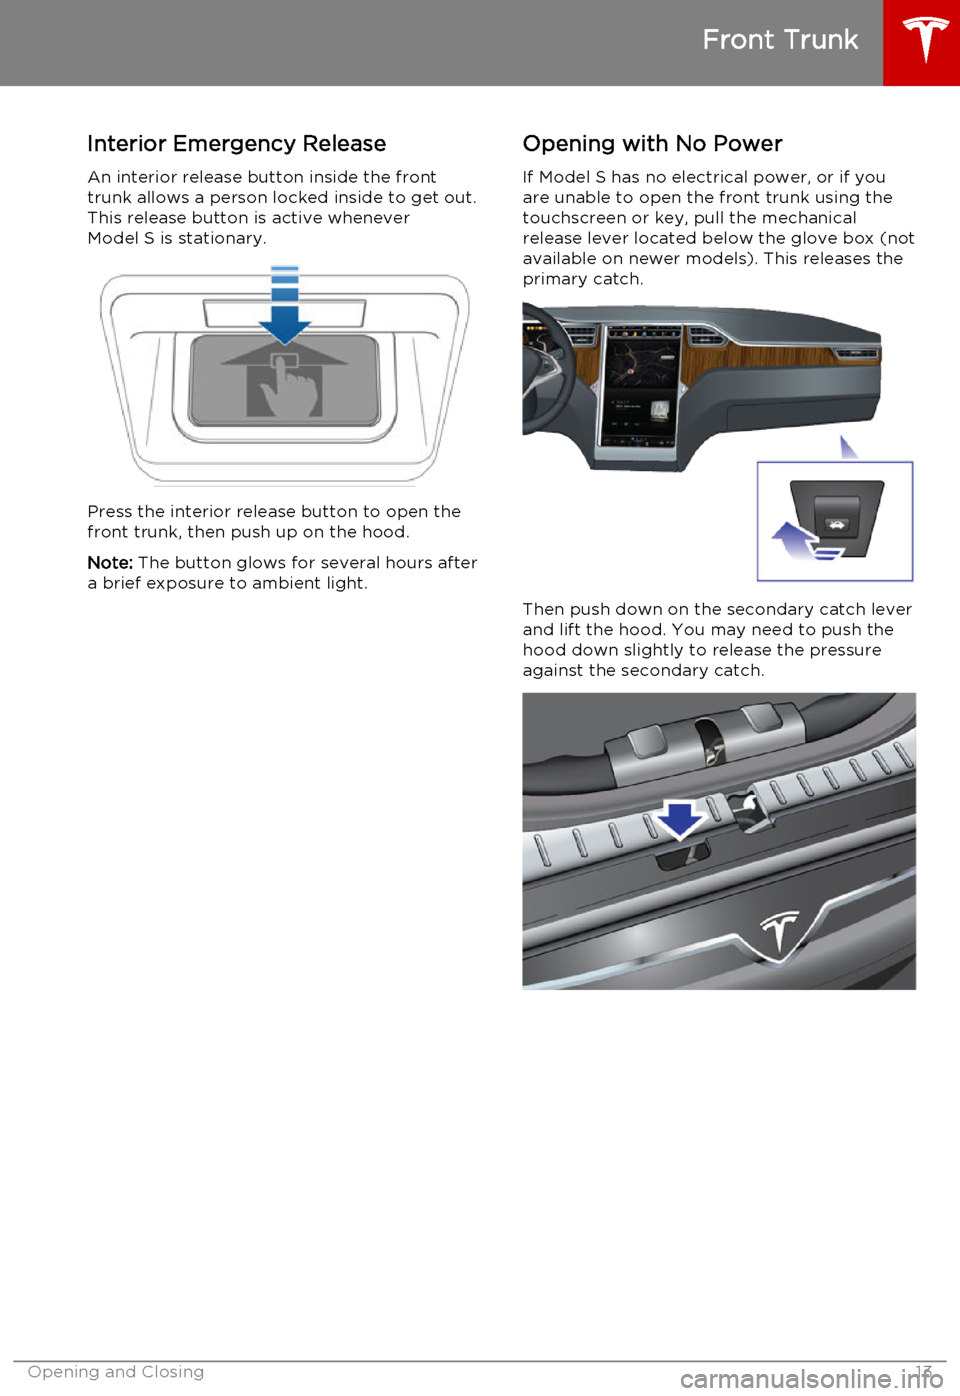 TESLA MODEL S 2015  Owners Manual Interior Emergency Release
An interior release button inside the front
trunk allows a person locked inside to get out.
This release button is active whenever Model S is stationary.
Press the interior 